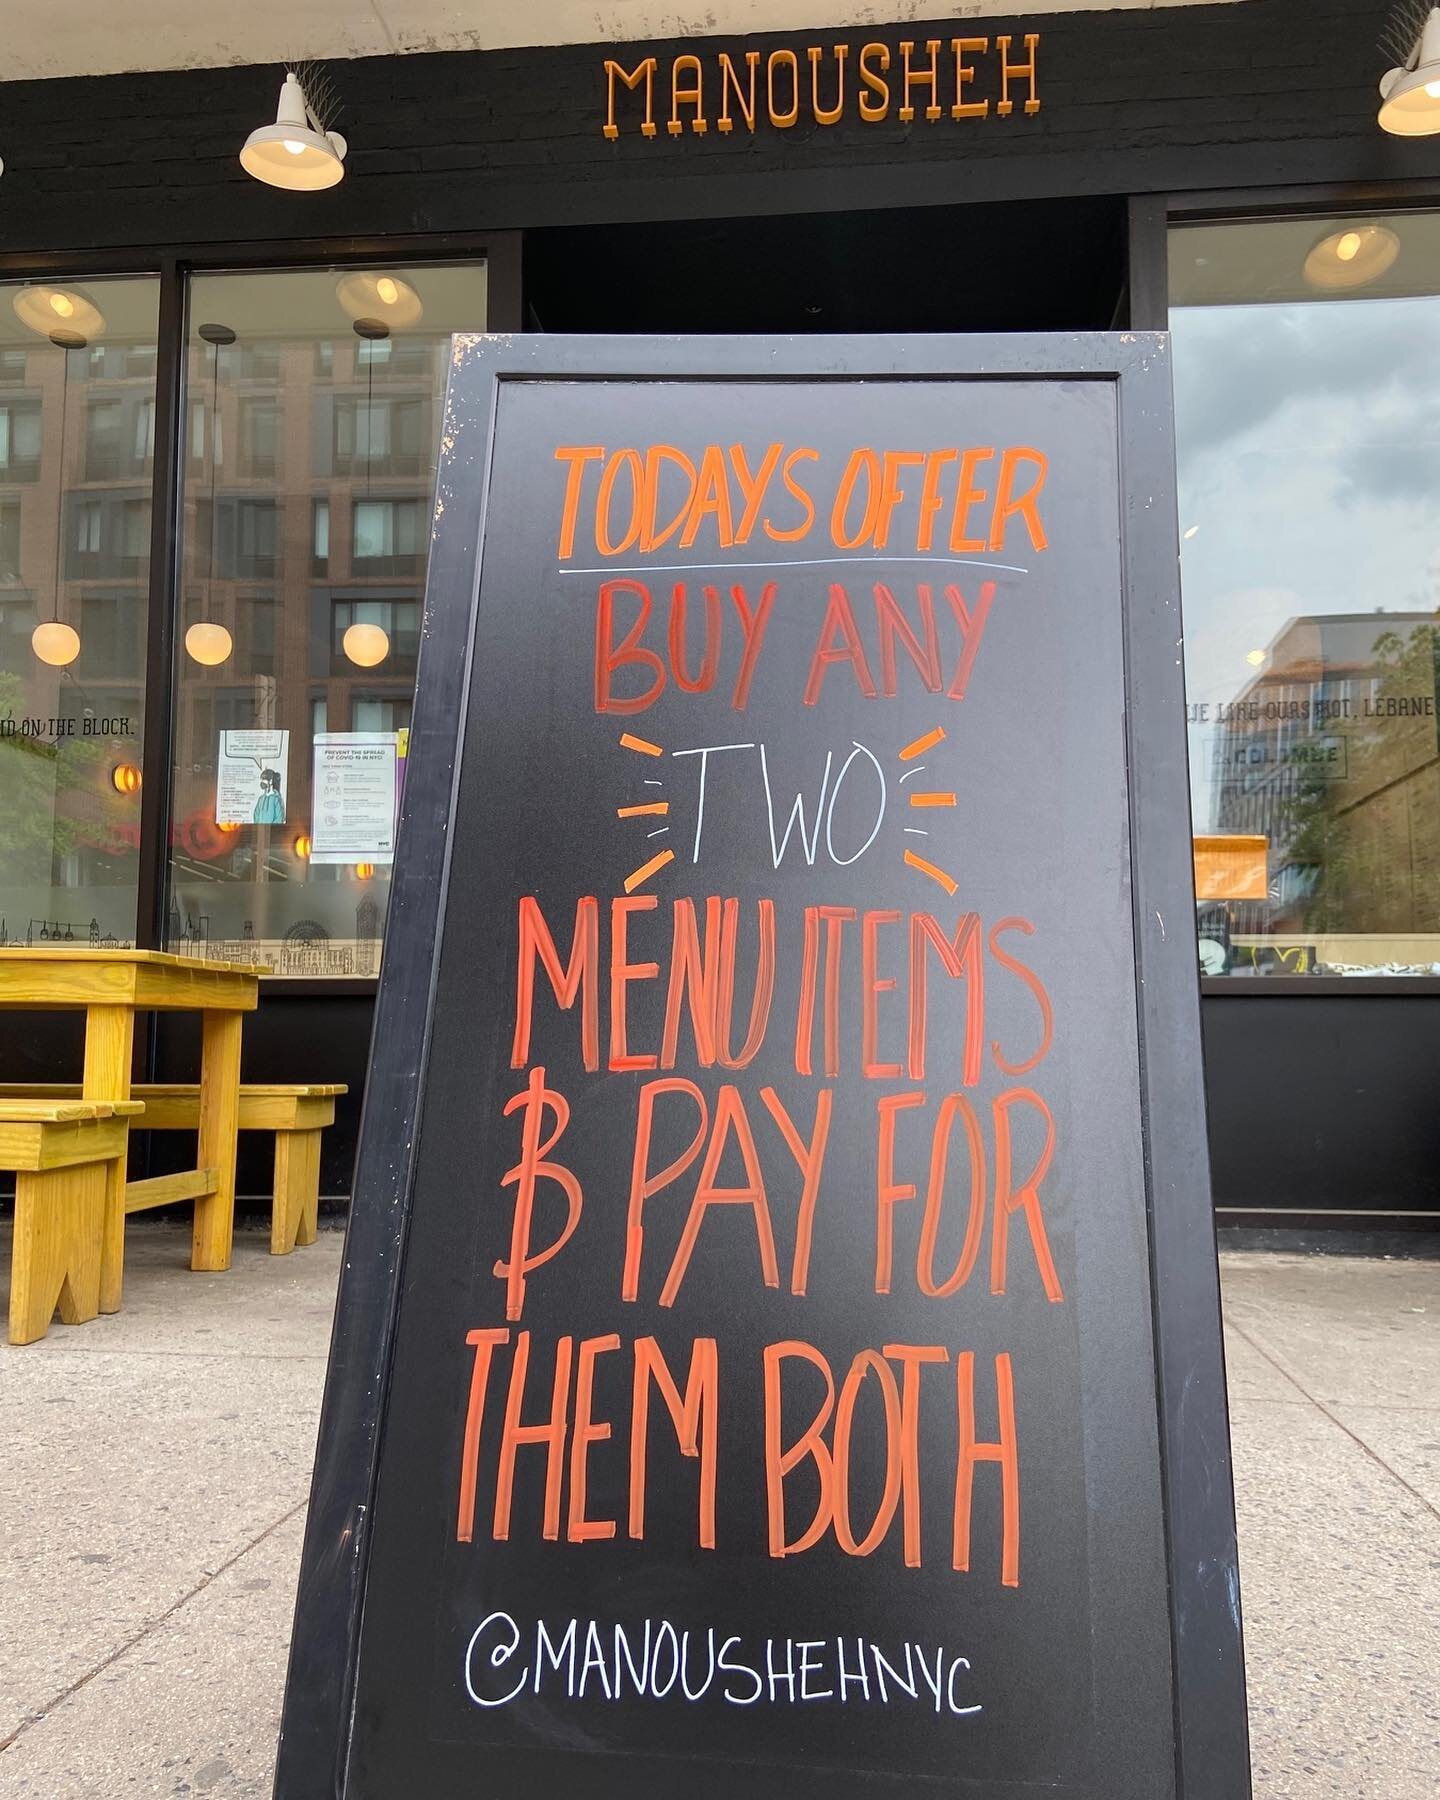 Have you seen our offer for today? That's right, buy any two menu items and pay for them both!😂⁠⁠